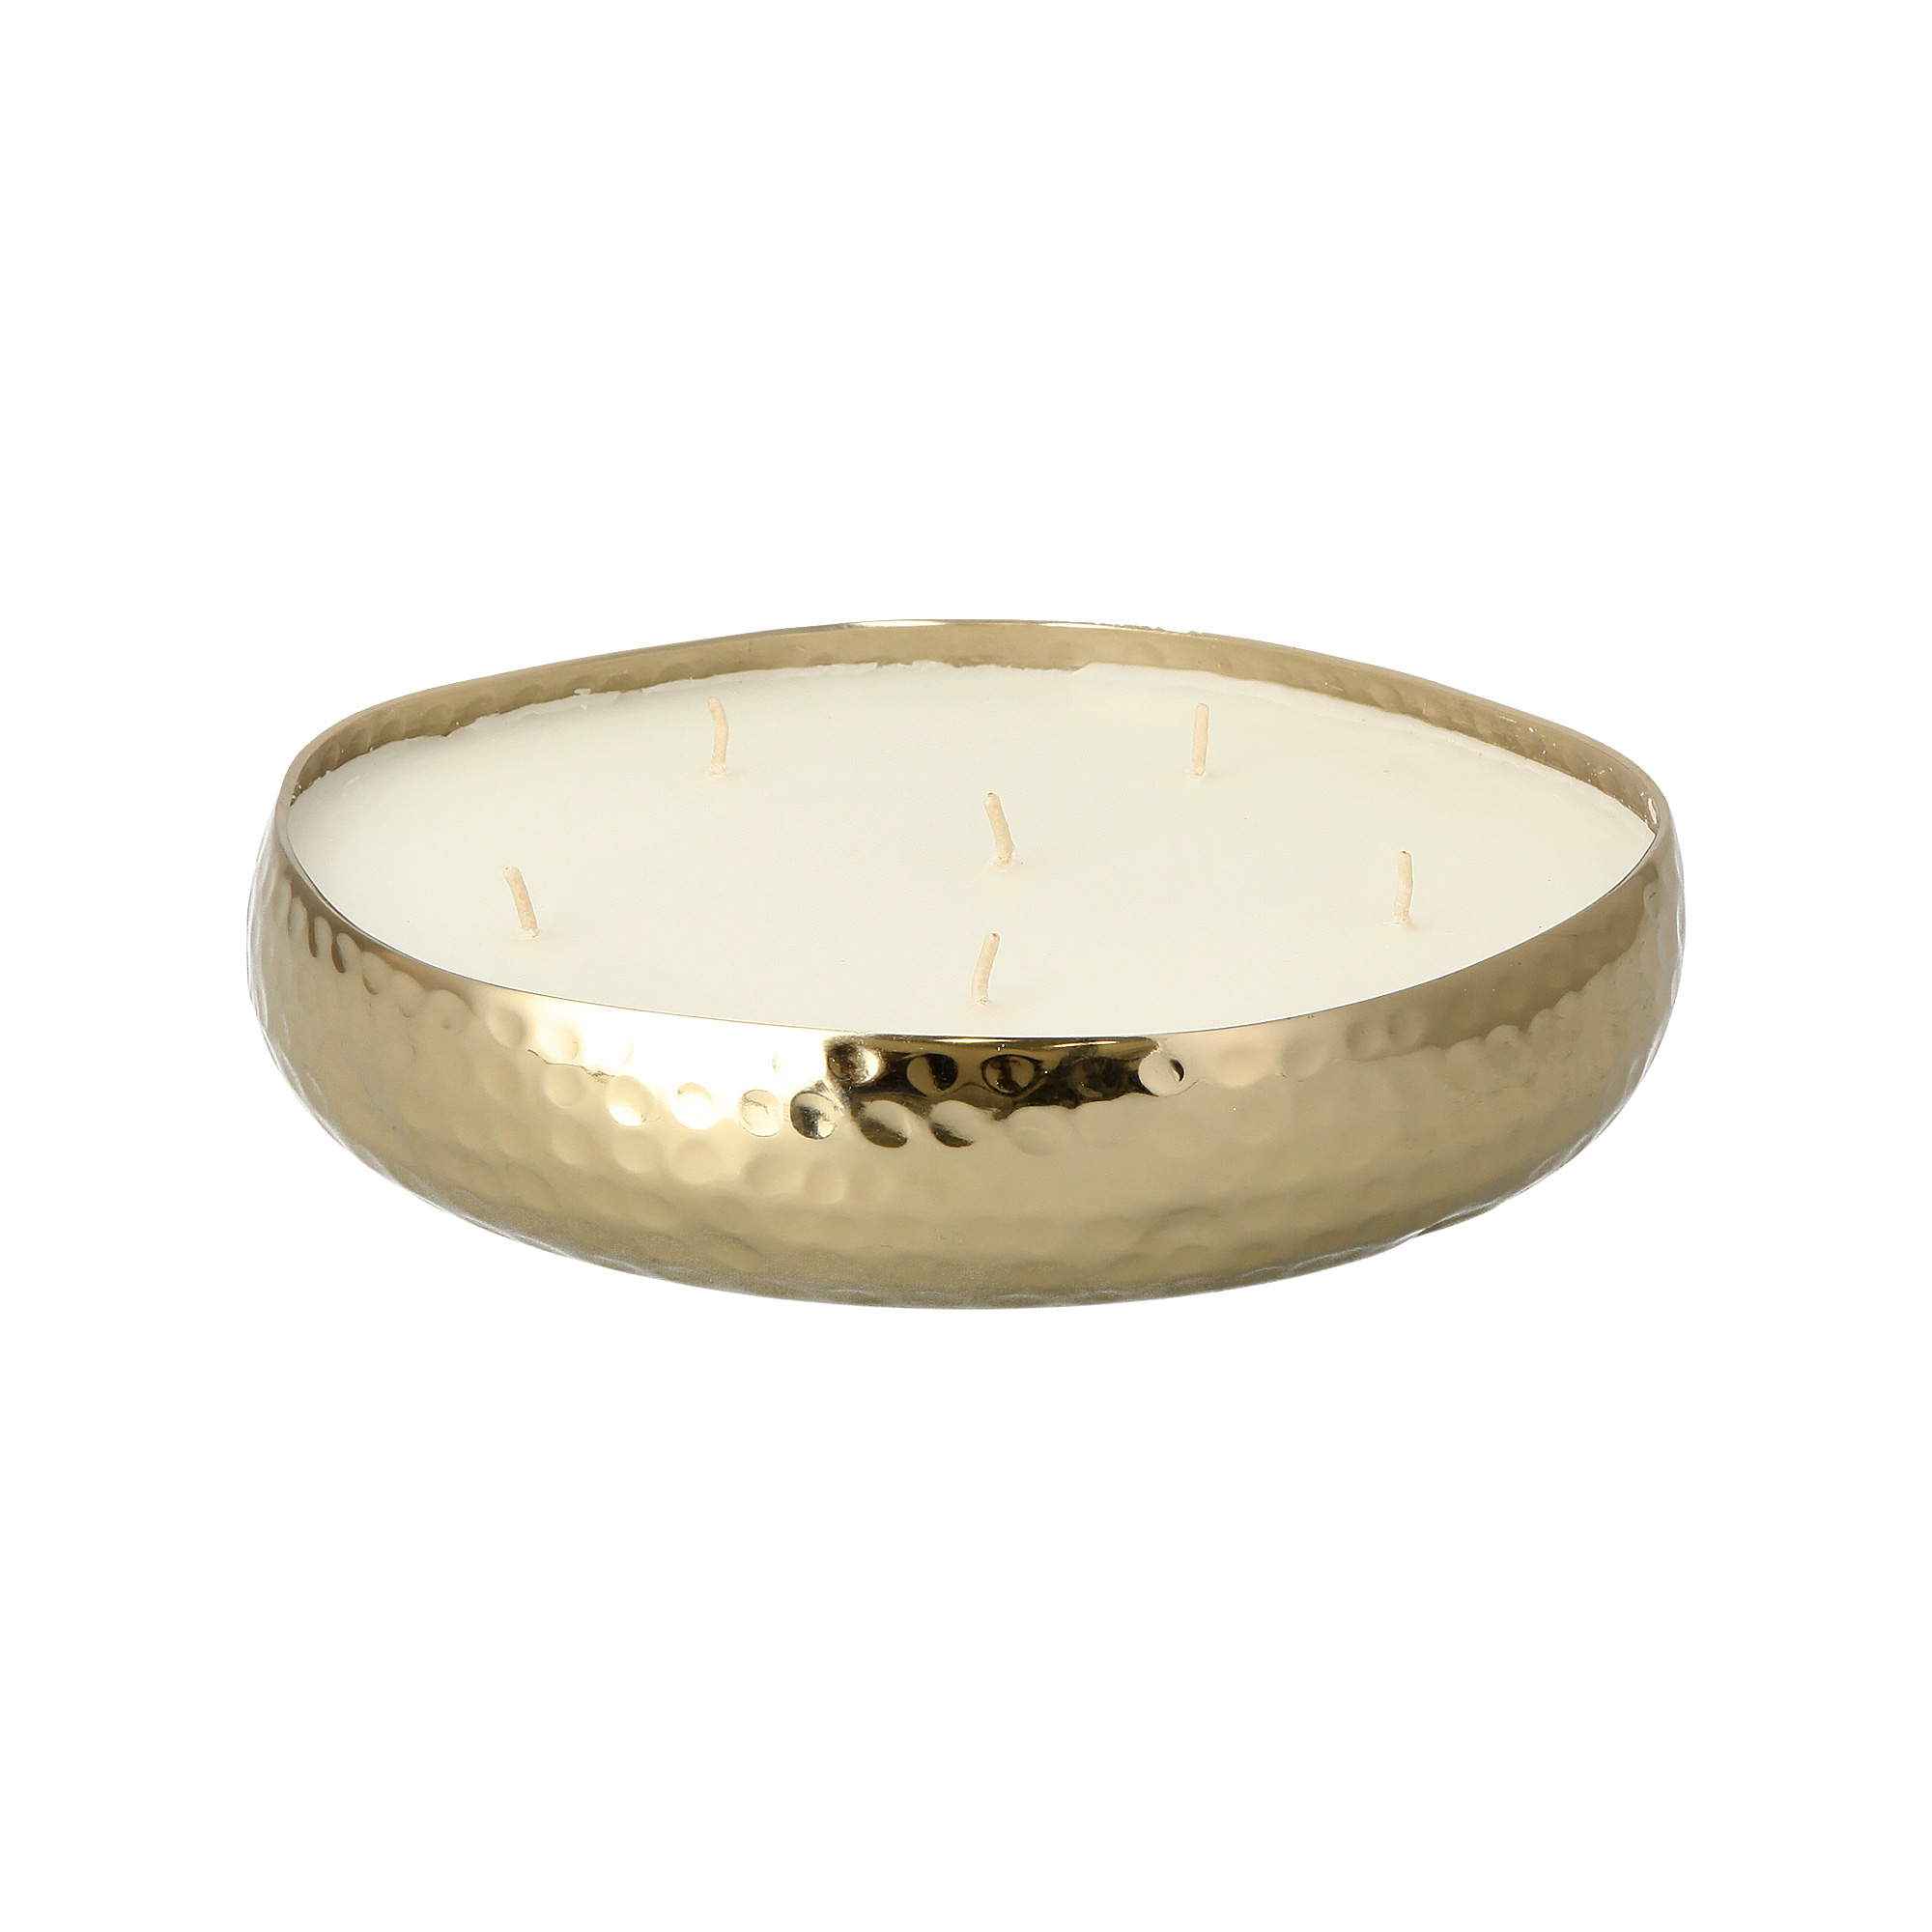 Buy Candle Tray Hammered Gold Online | Nice